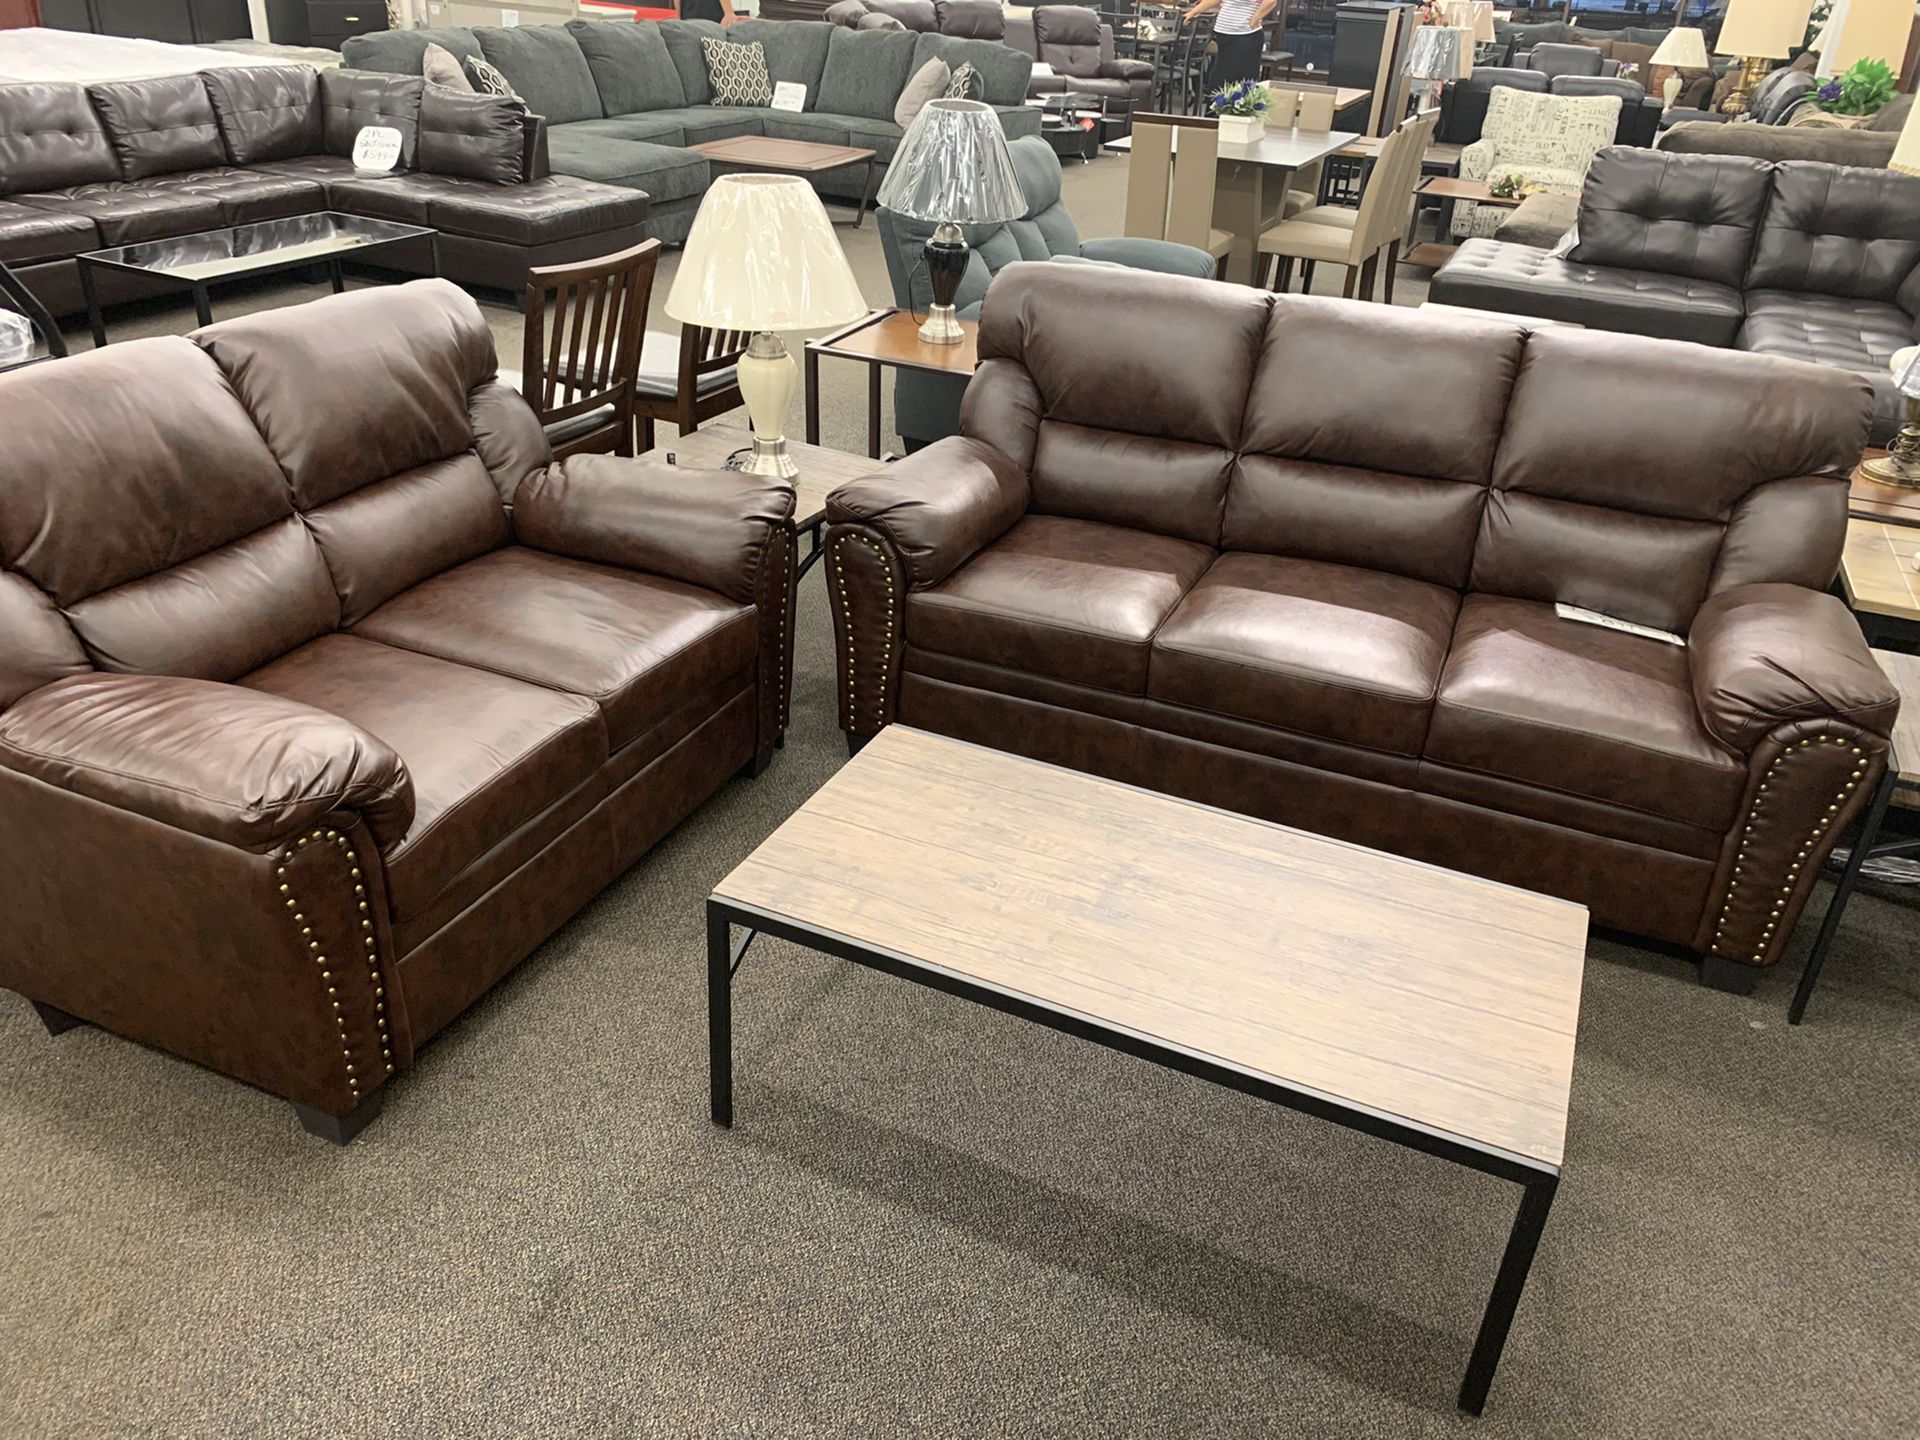 AWESOME BRAND NEW 2PC LEATHER SOFA AND LOVE SEAT